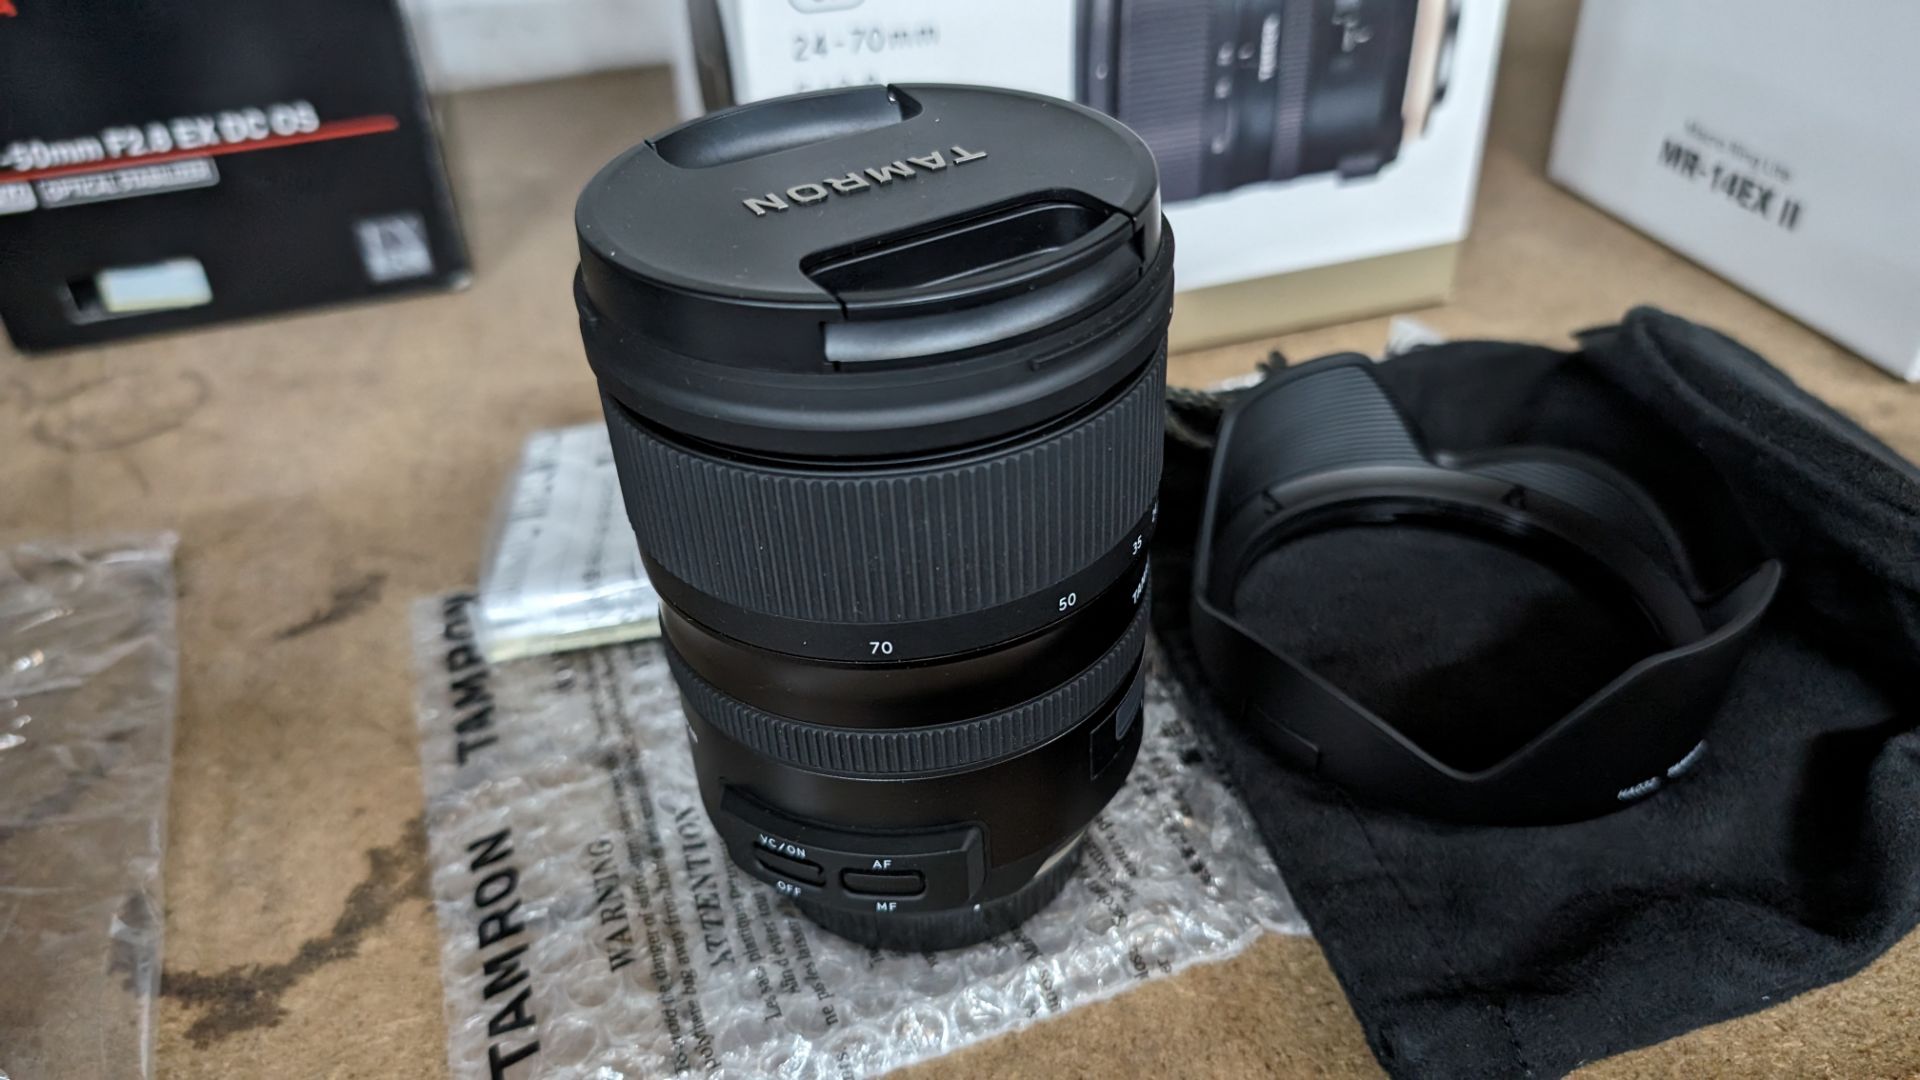 Tamron SP 24-70mm f/2.8 Di VC USD G2 lens, including soft carry case and attachment - Image 7 of 10